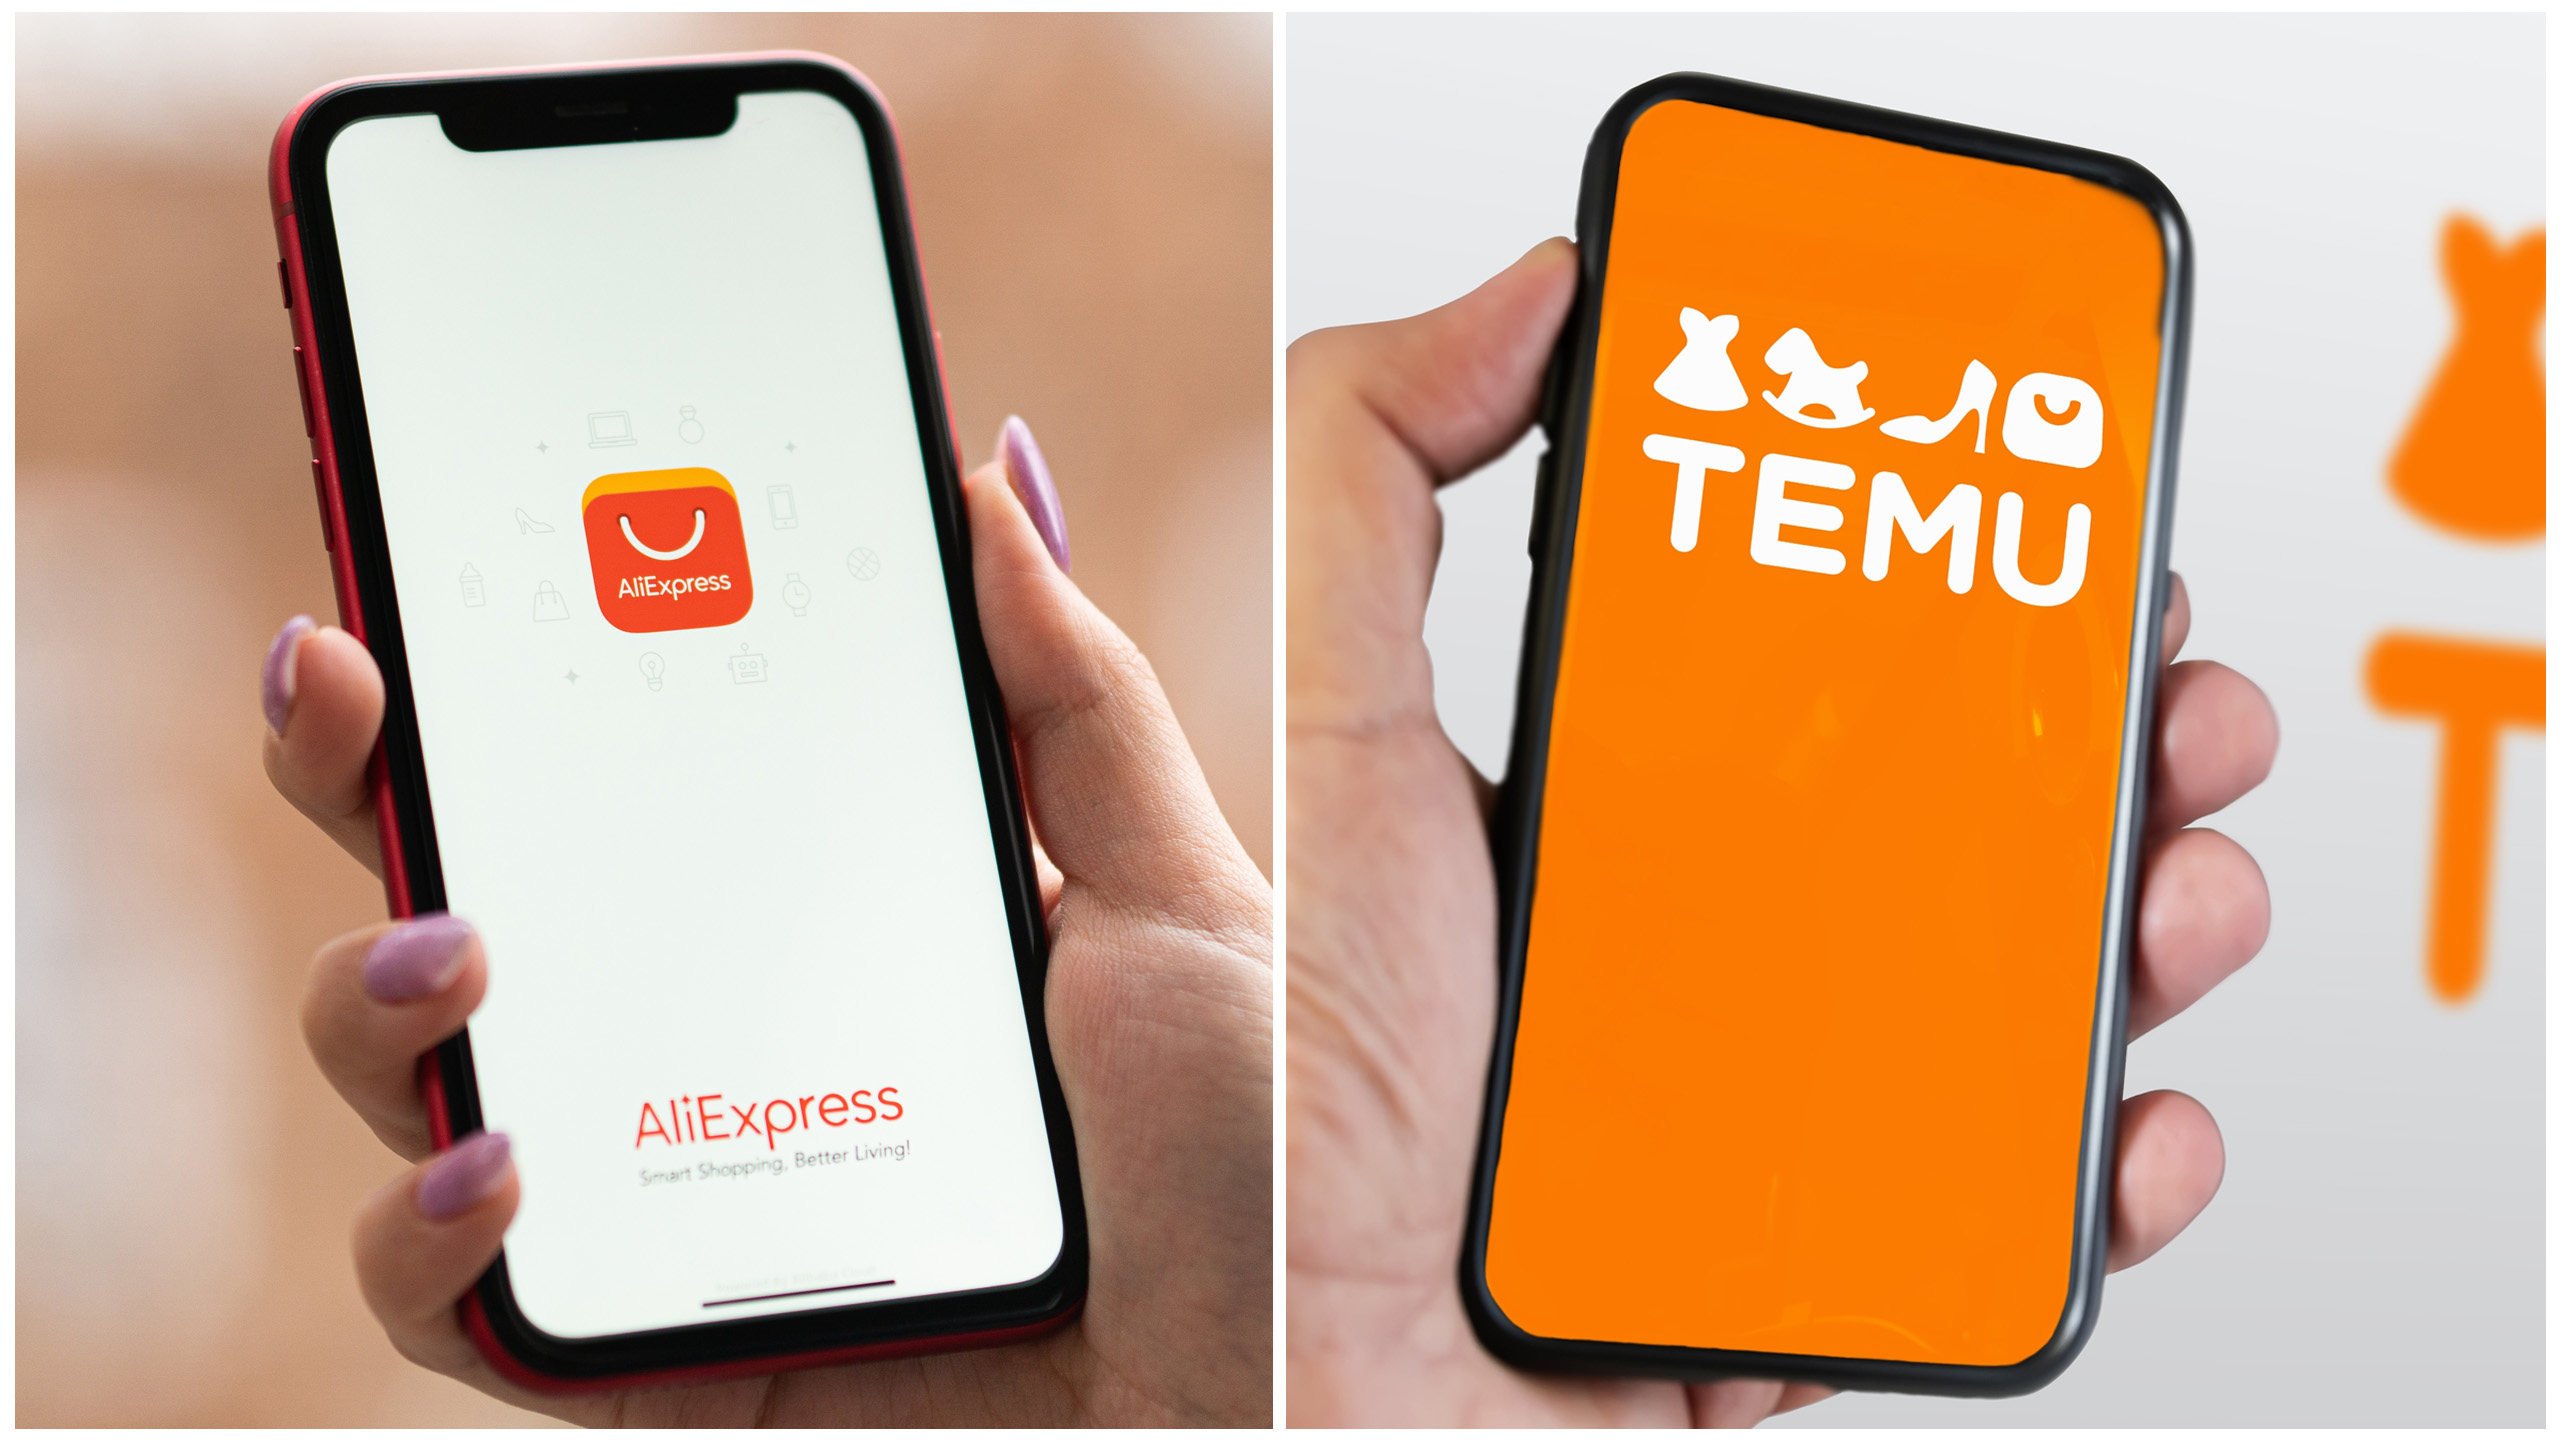 South Korea’s  personal data protection watchdog said it is looking into consumer data practices of Chinese e-commerce platforms AliExpres and Temu. Photo: Shutterstock
